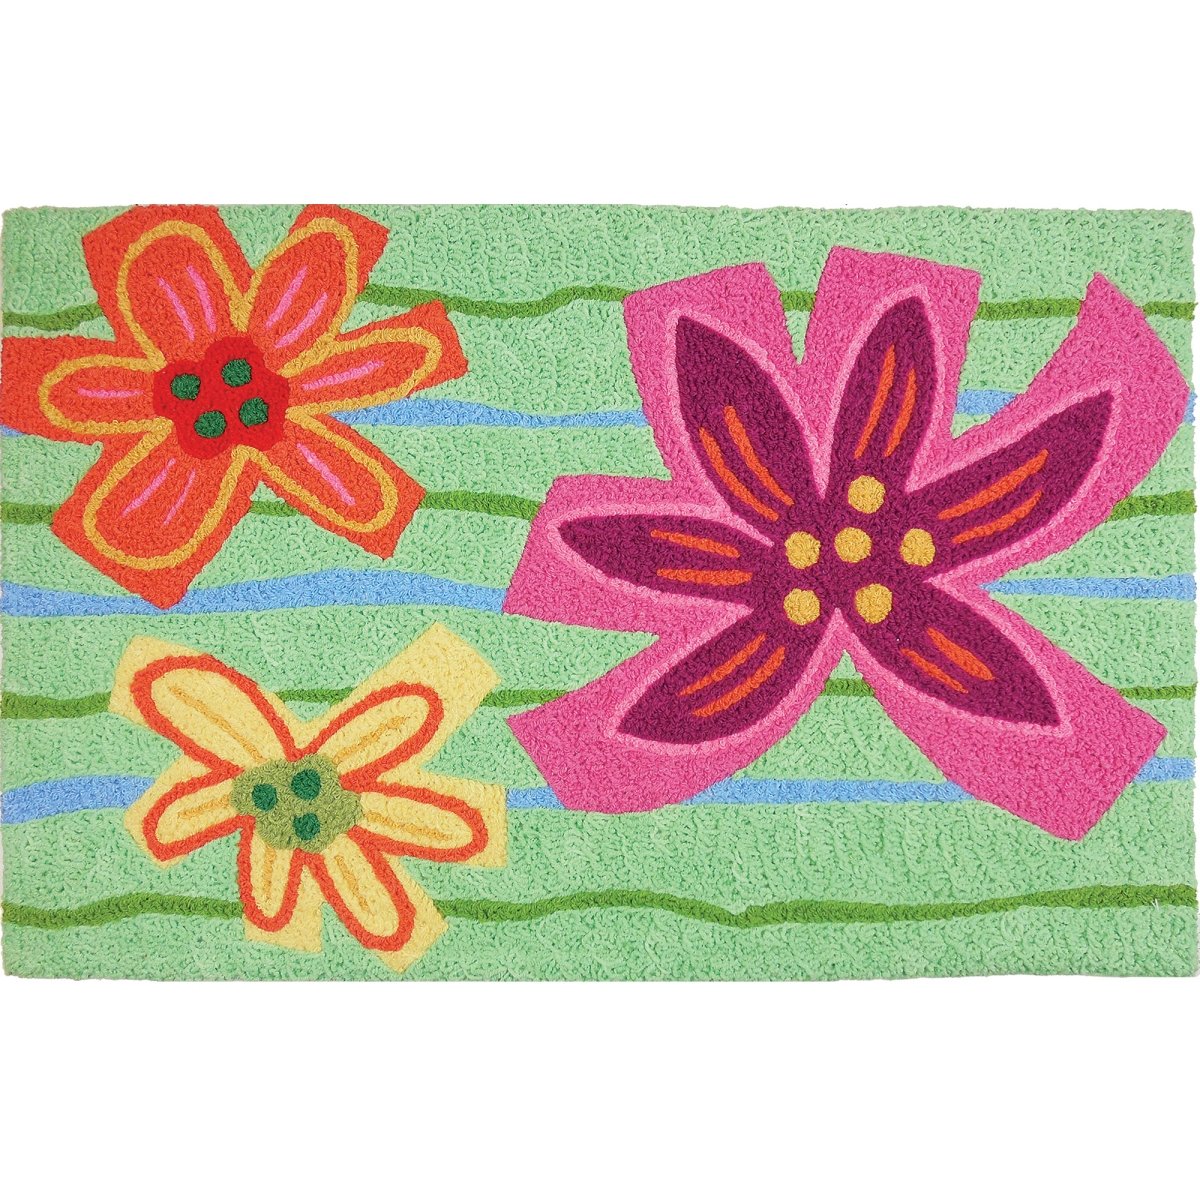 Jb-mh002 20 X 30 In. Crayon Hibiscus Rug